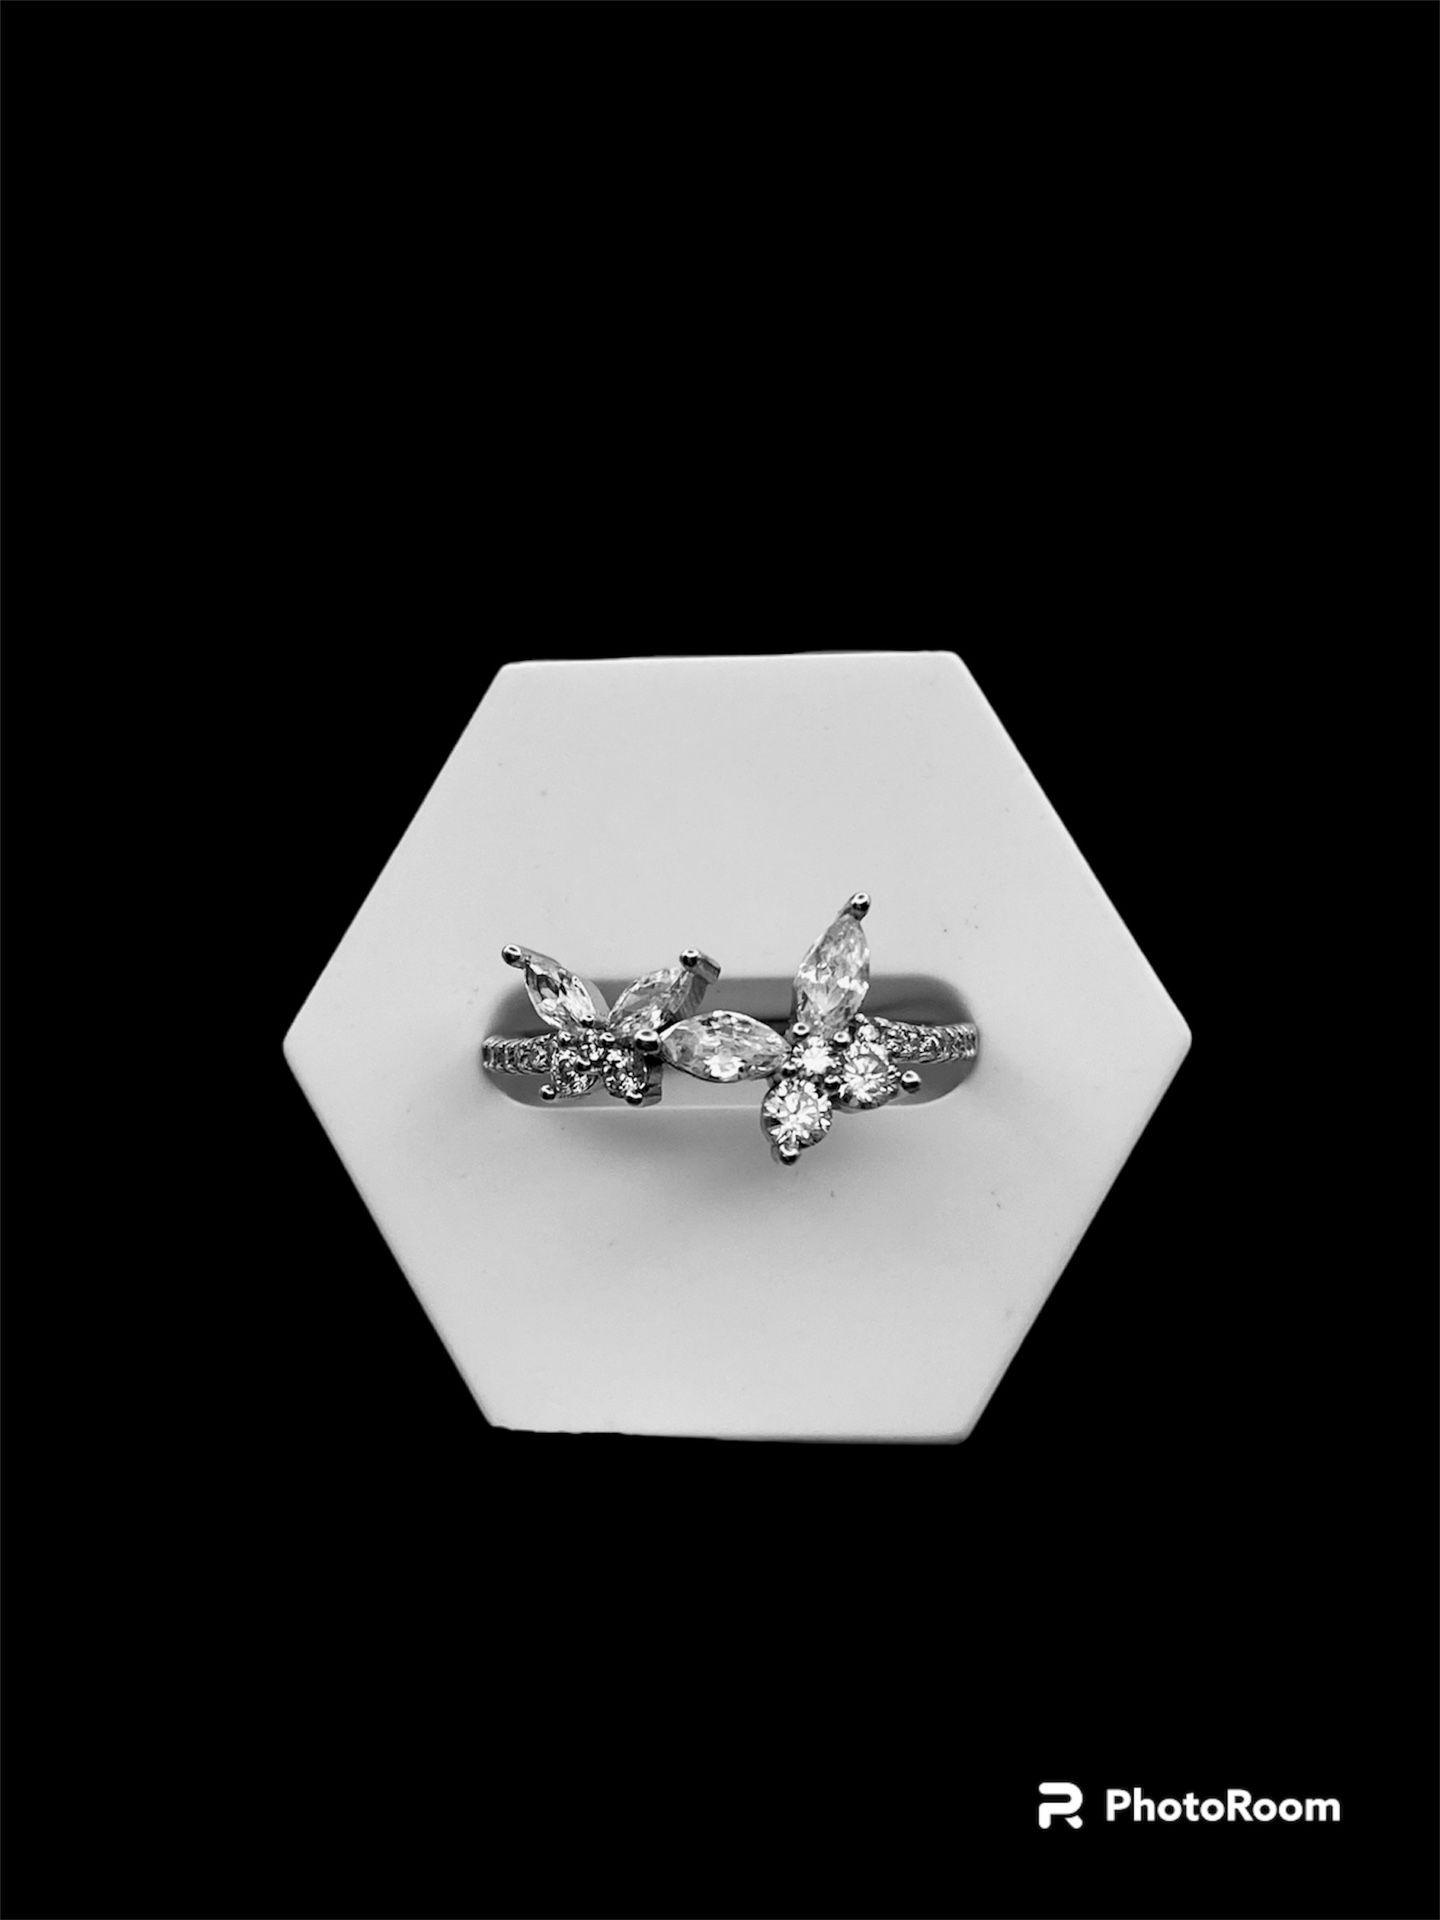 Butterfly Ring 925Sterling Silver Ring  Sizes 6-7  Women’s Ring Gift Idea 